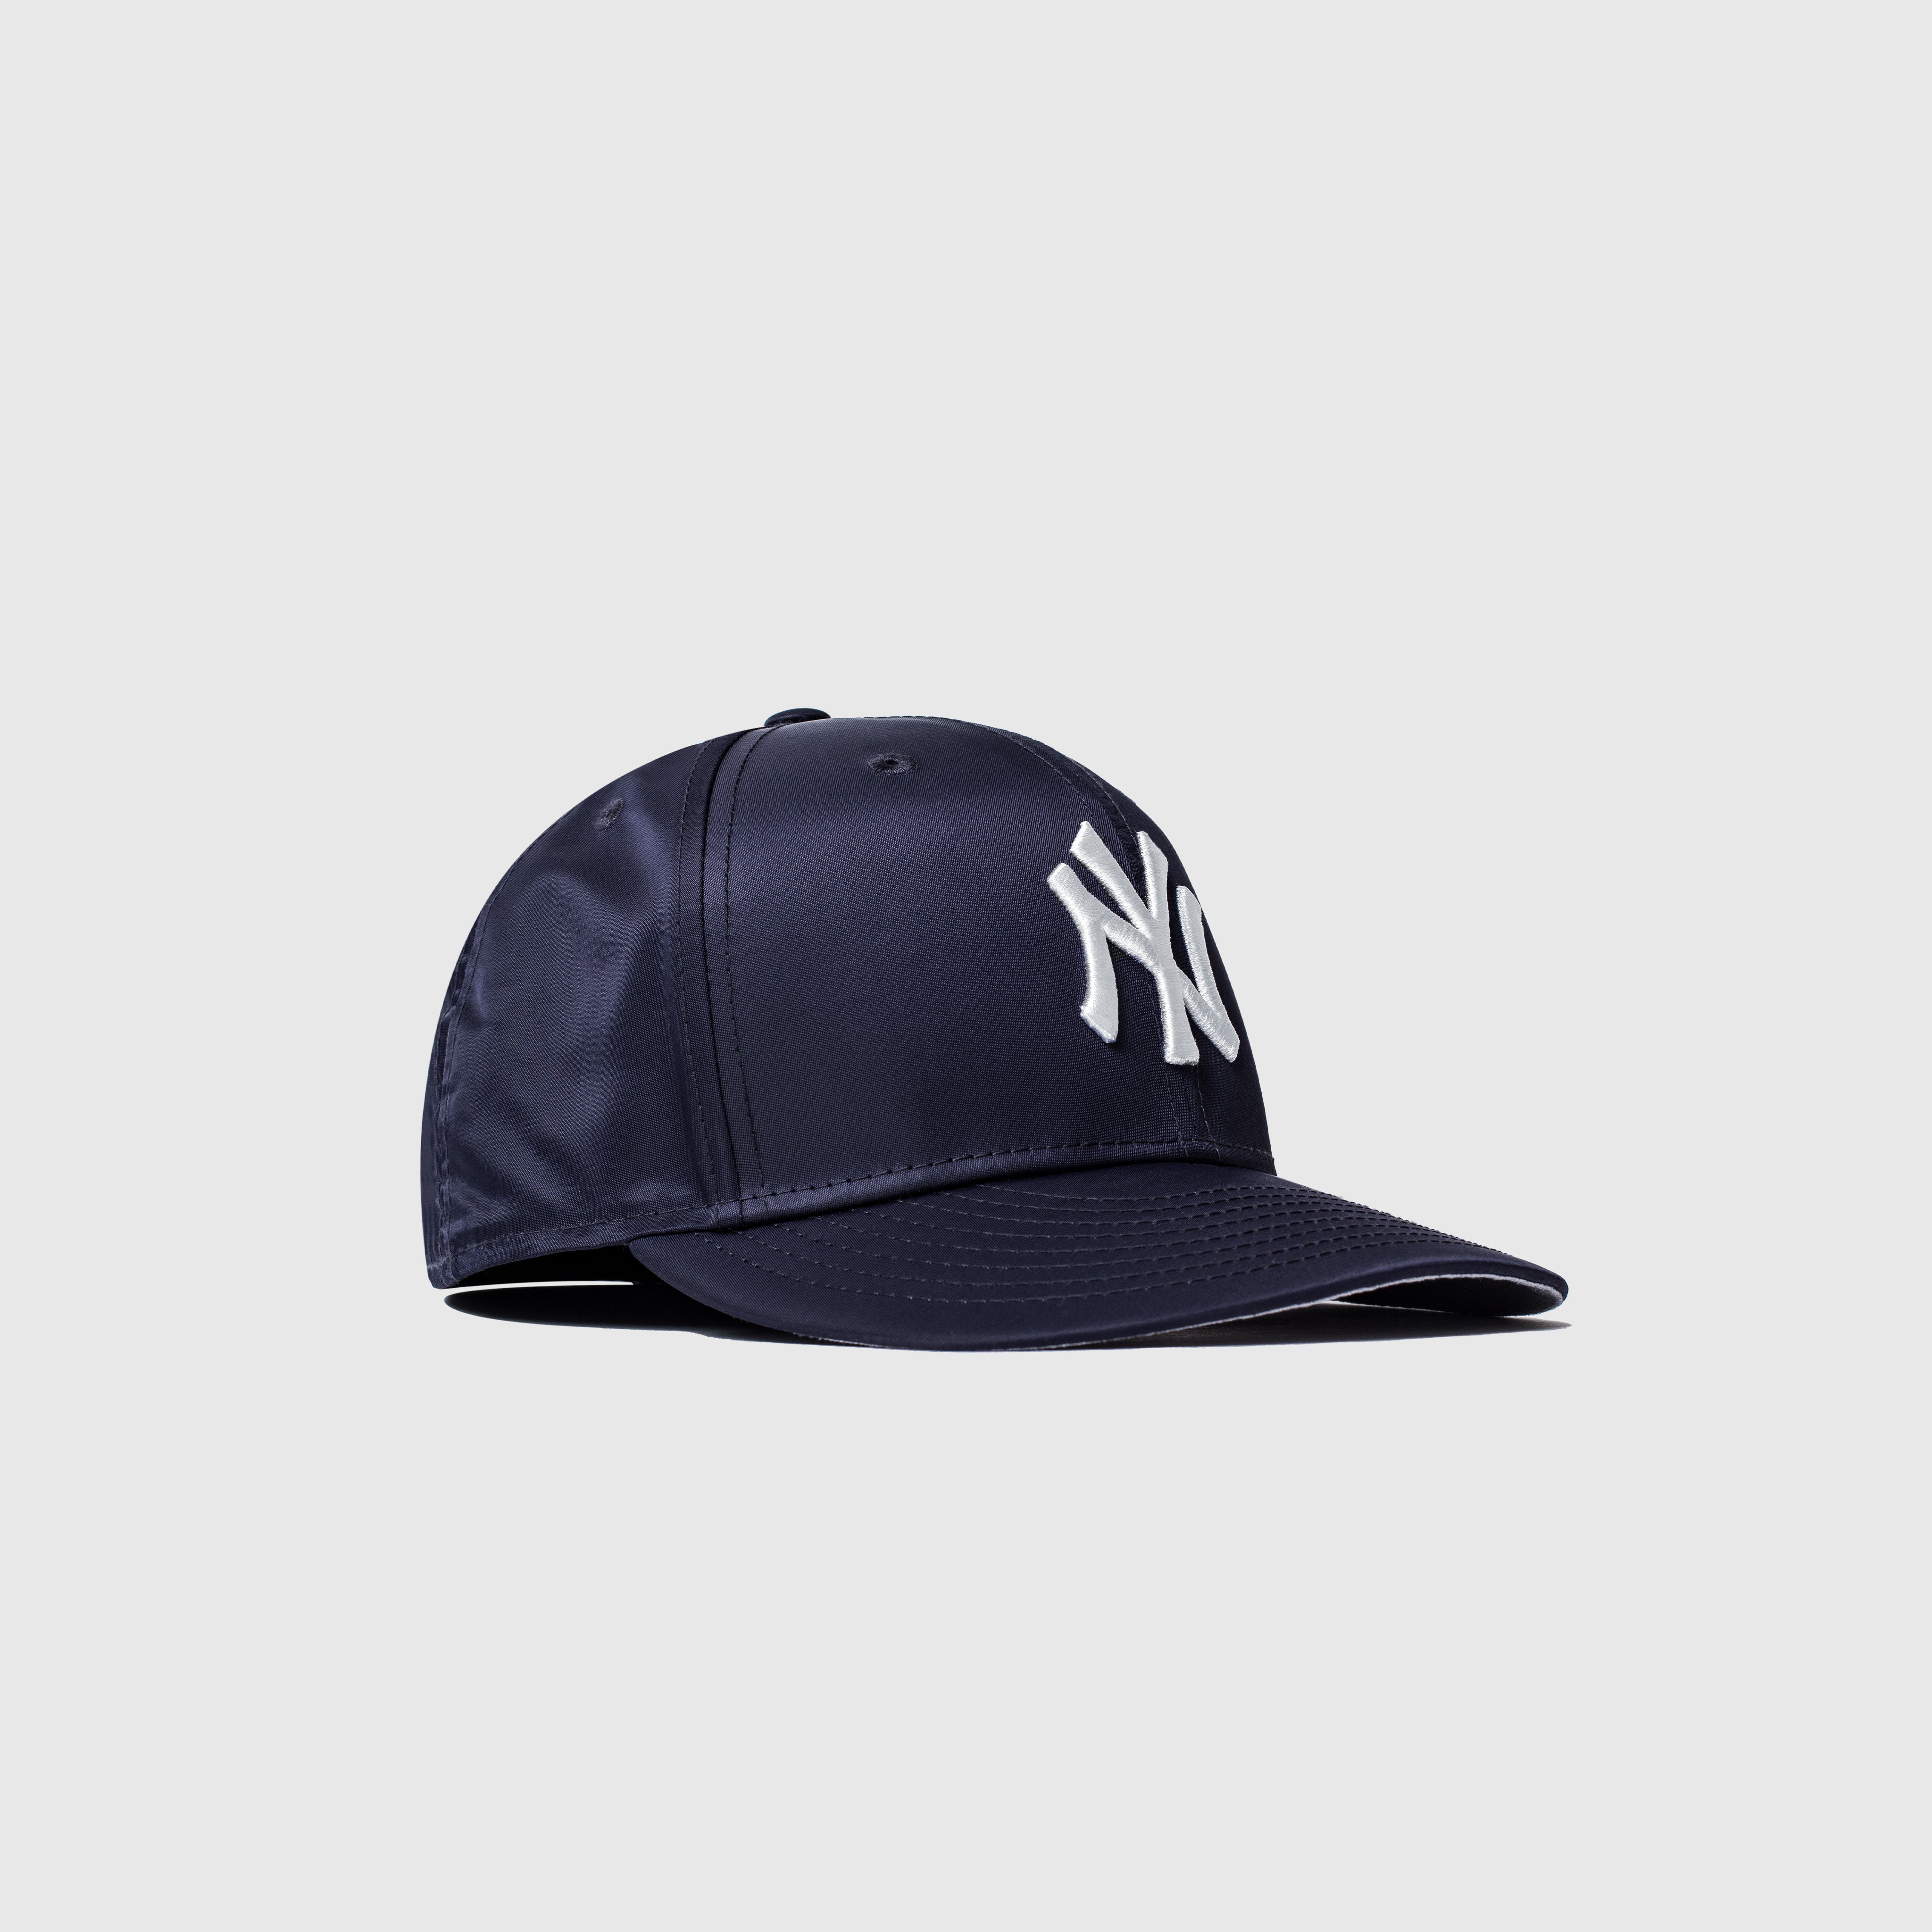 PACKER X NEW ERA NEW YORK YANKEES 59FIFTY FITTED 